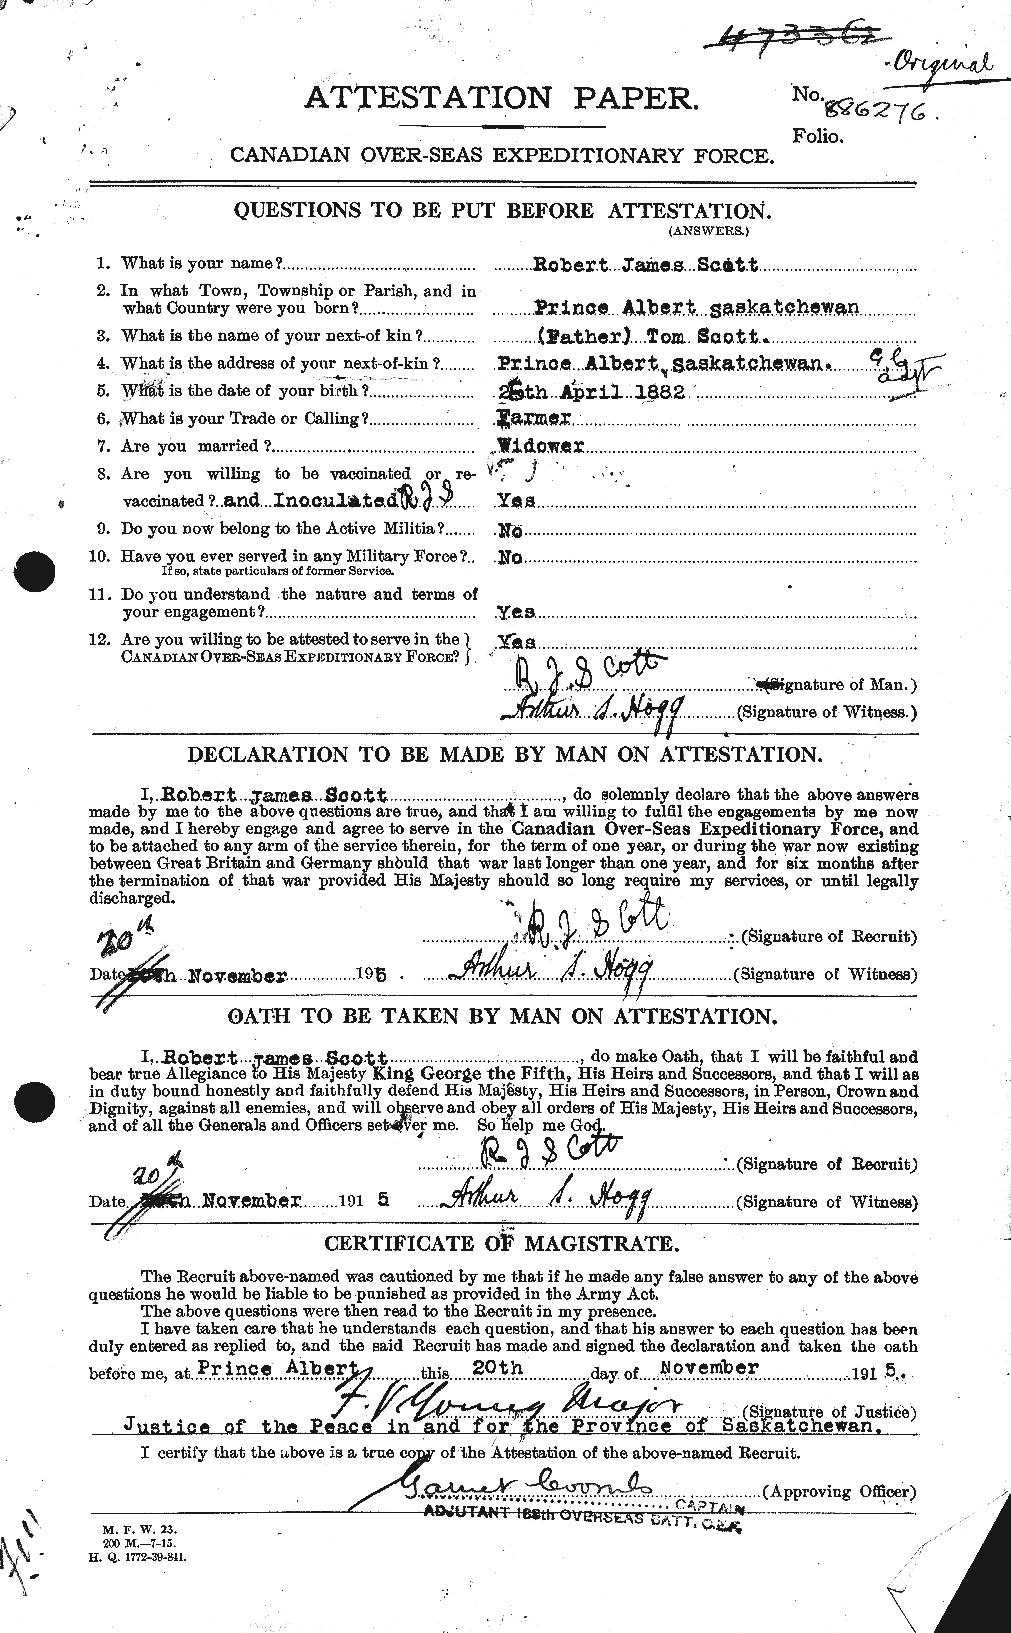 Personnel Records of the First World War - CEF 089134a